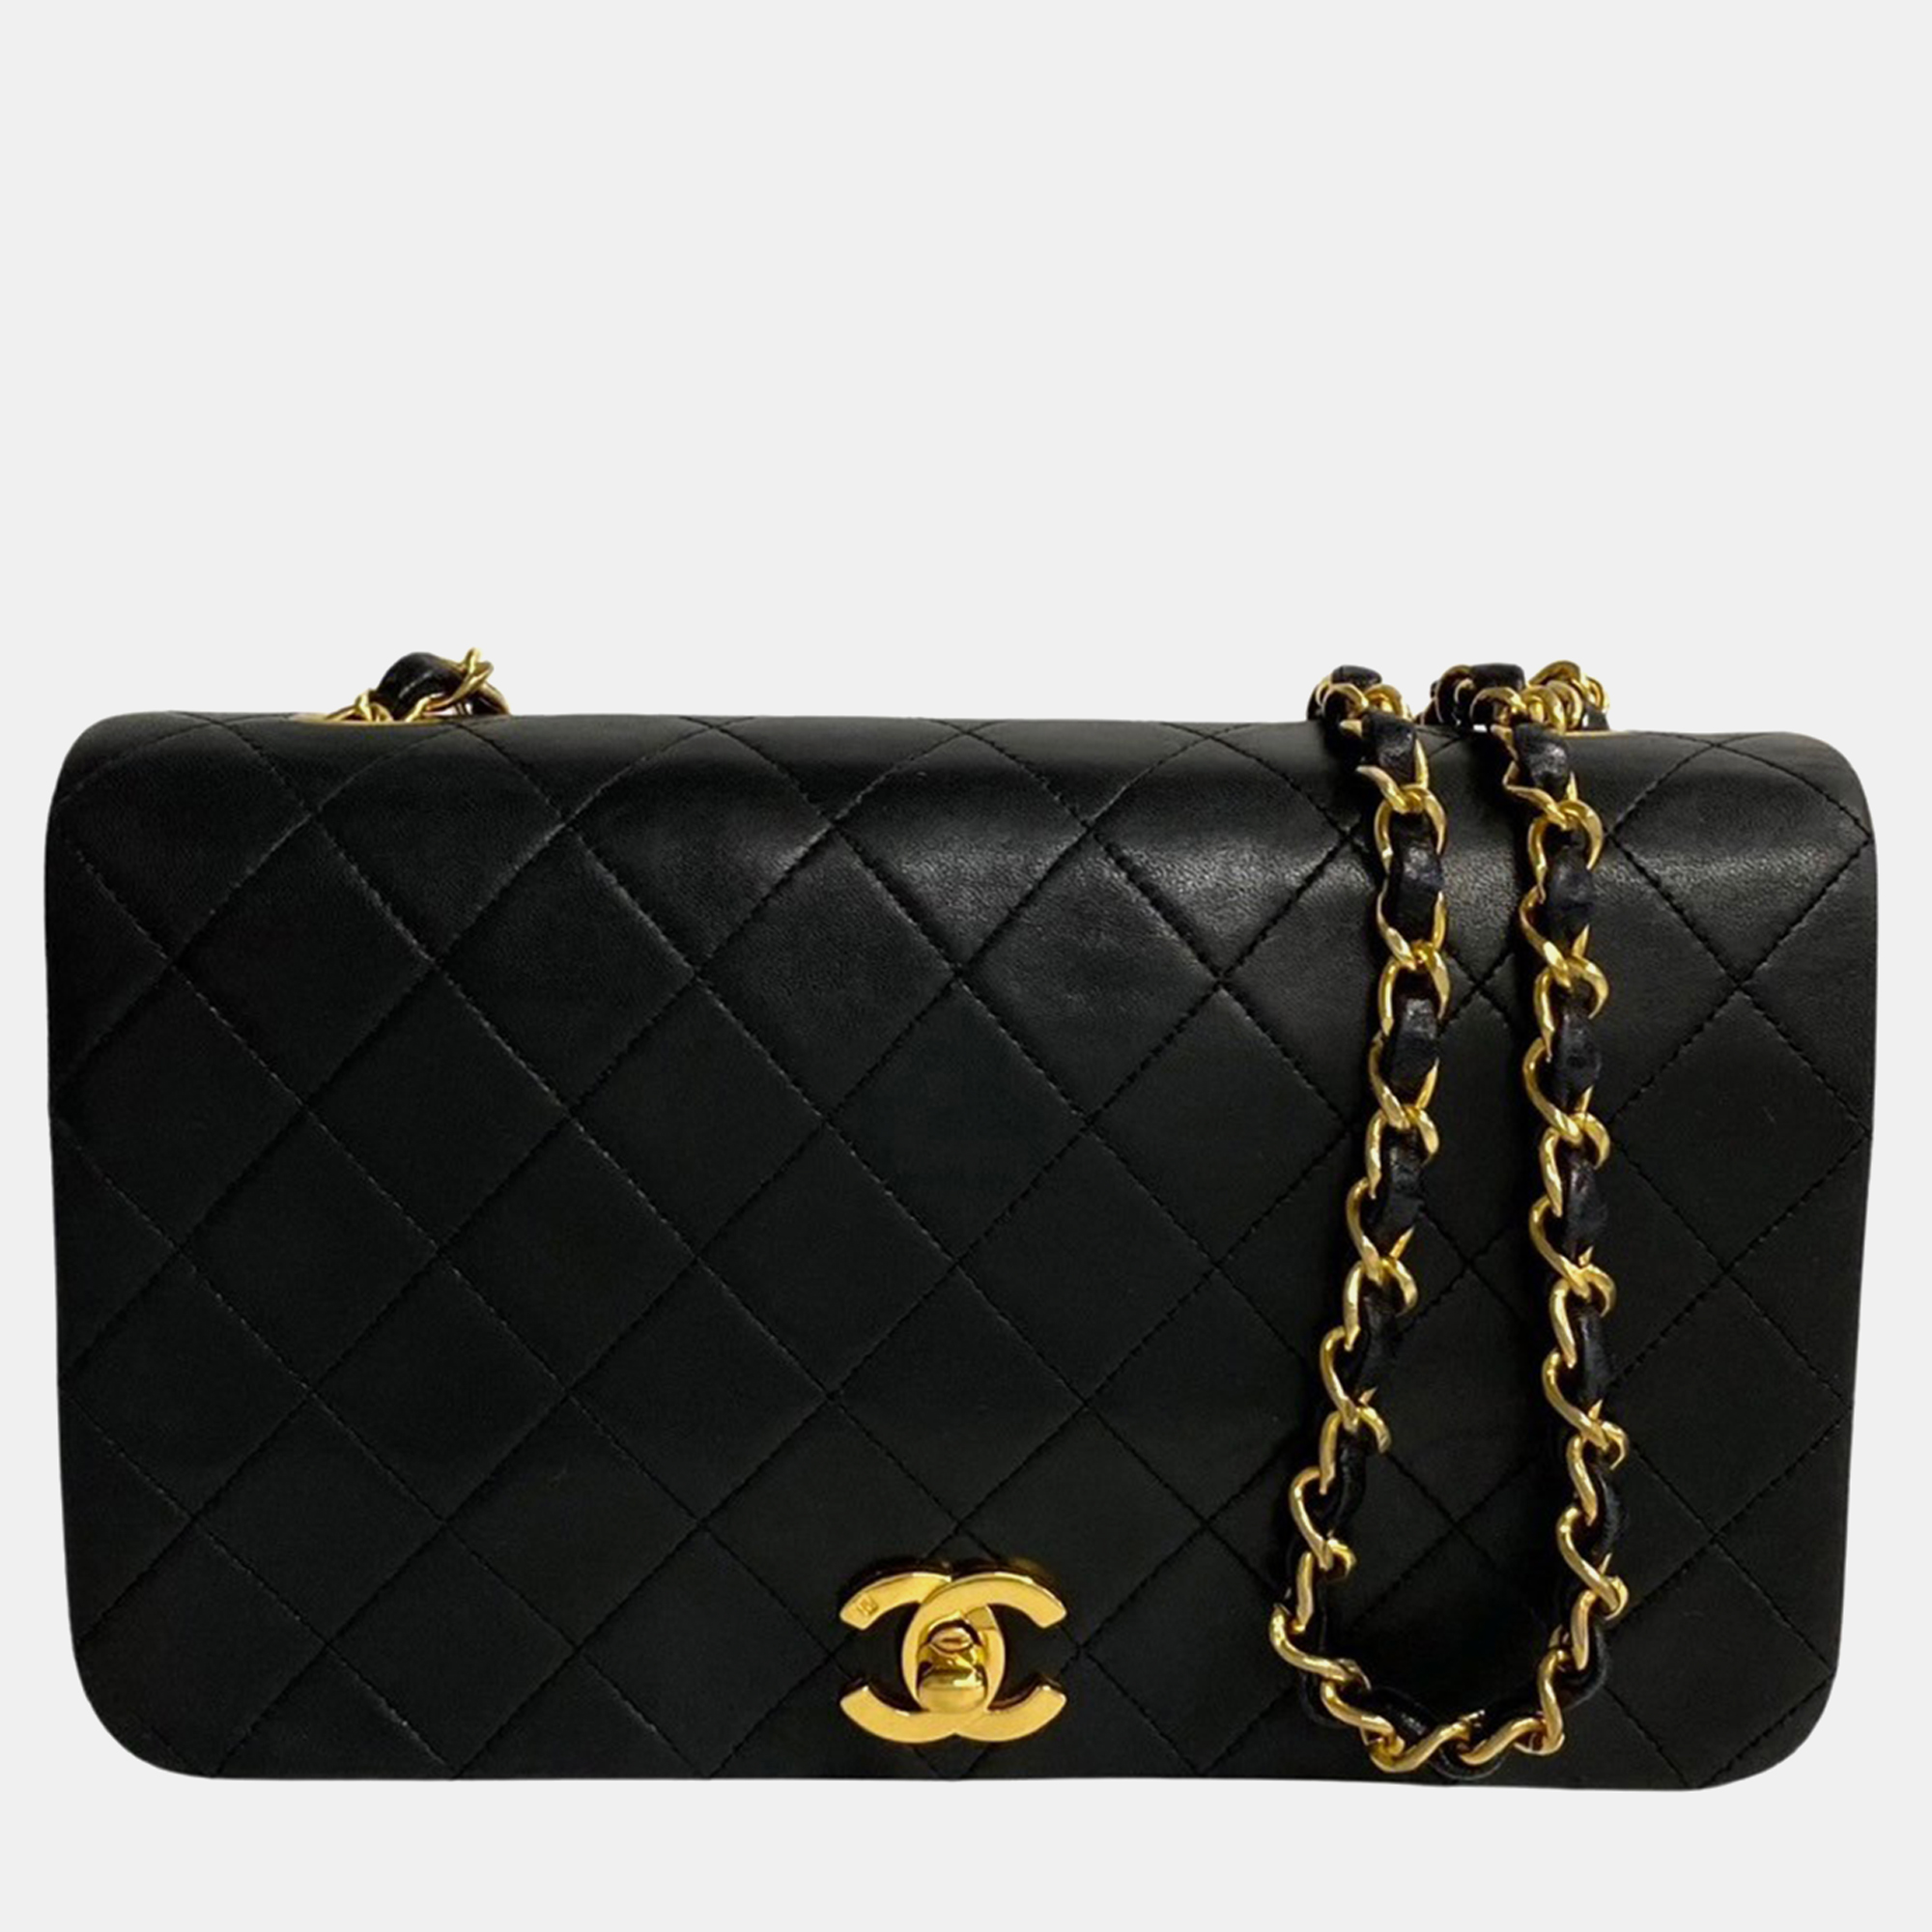 Chanel black leather quilted cc full flap crossbody bag